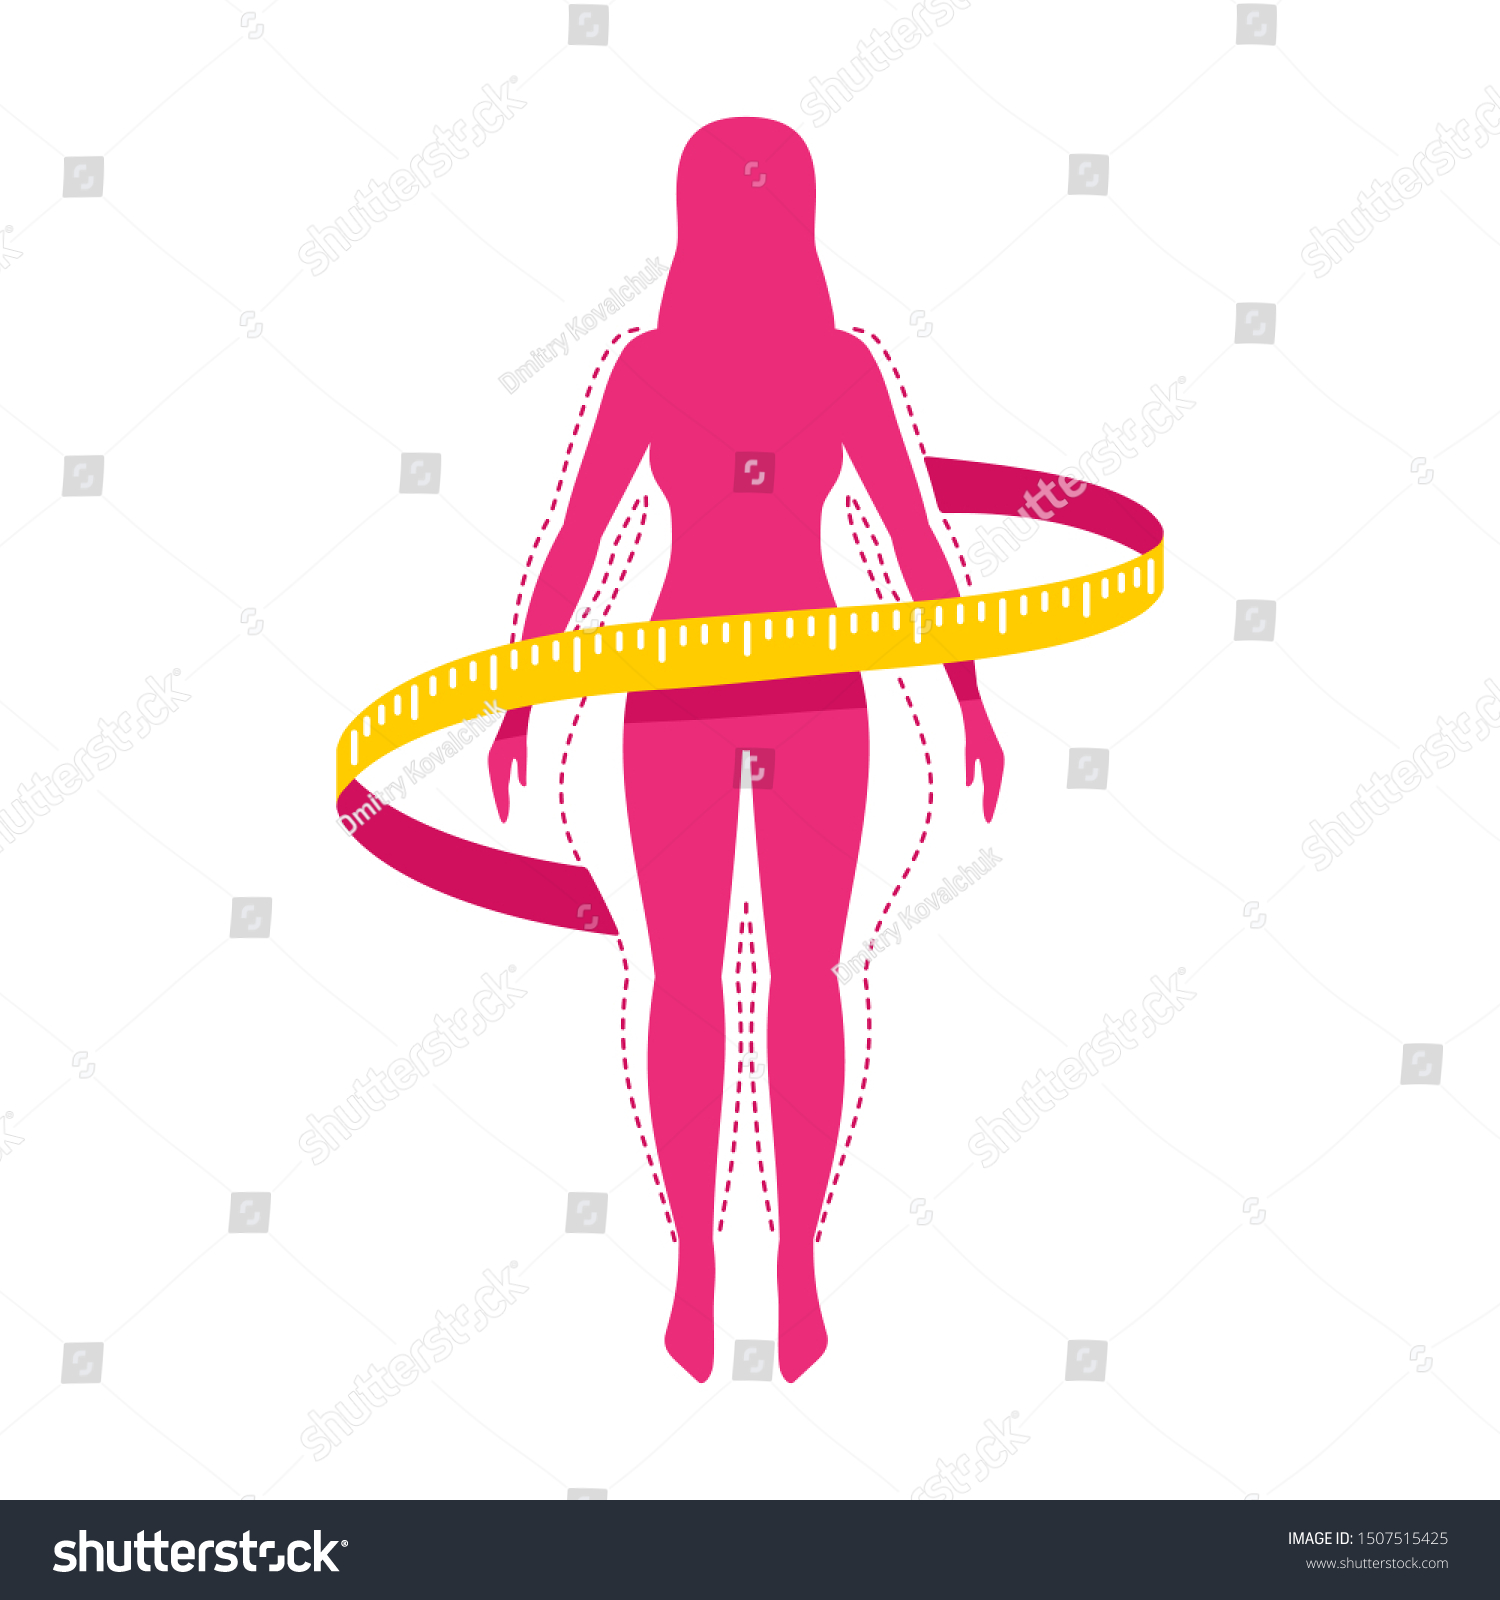 SVG of Weight loss challenge logo (isolated icon) - female silhouette (fat and shapely figure) with measuring tape around svg